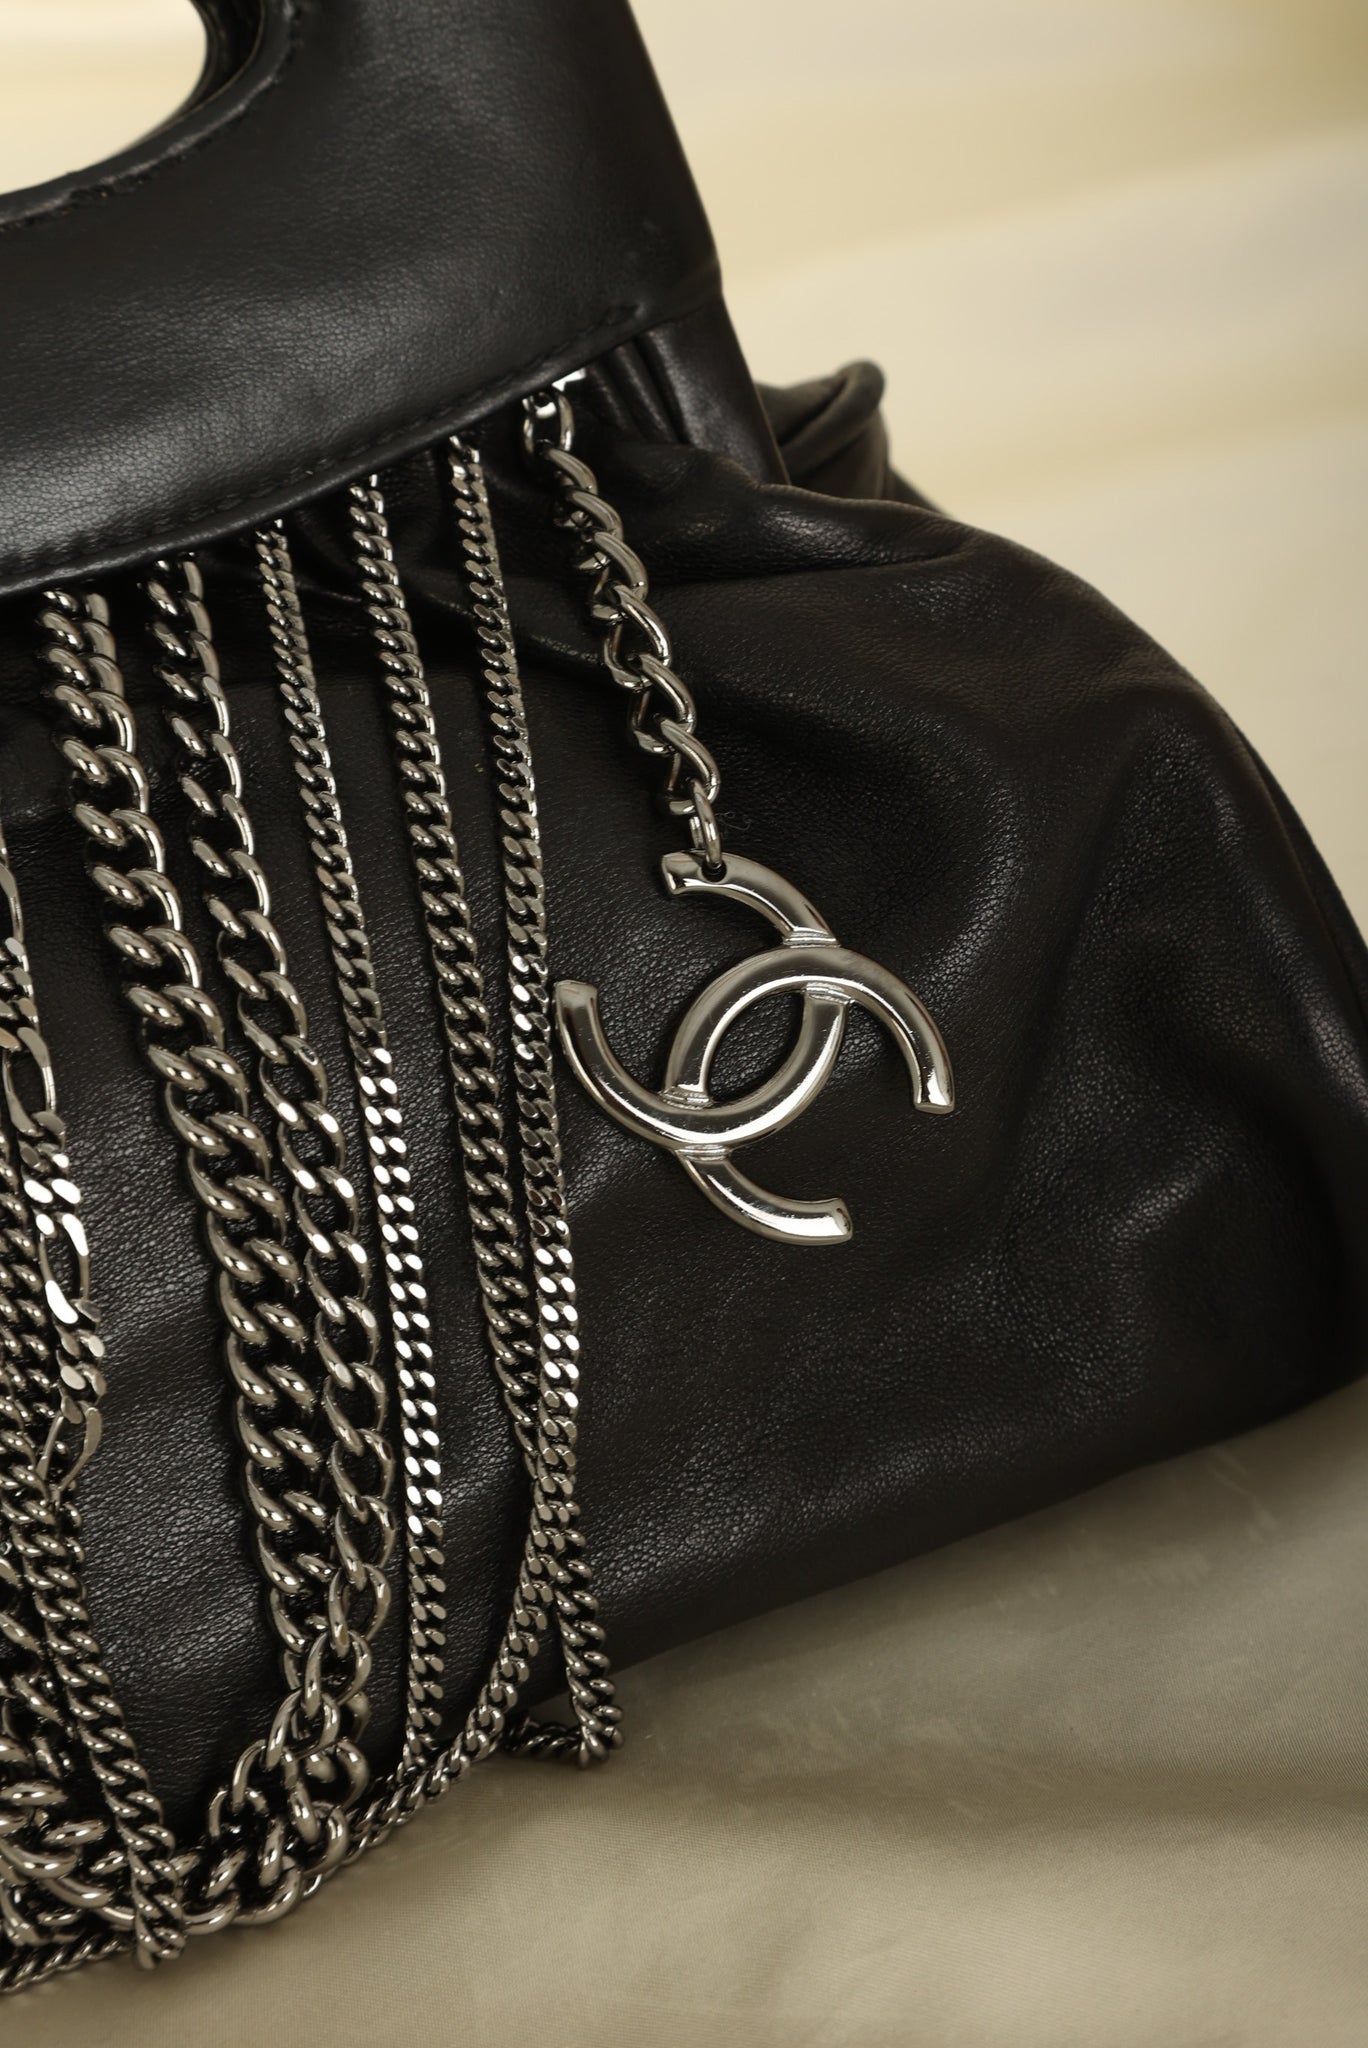 Extremely Rare Chanel Chain Handle Bag